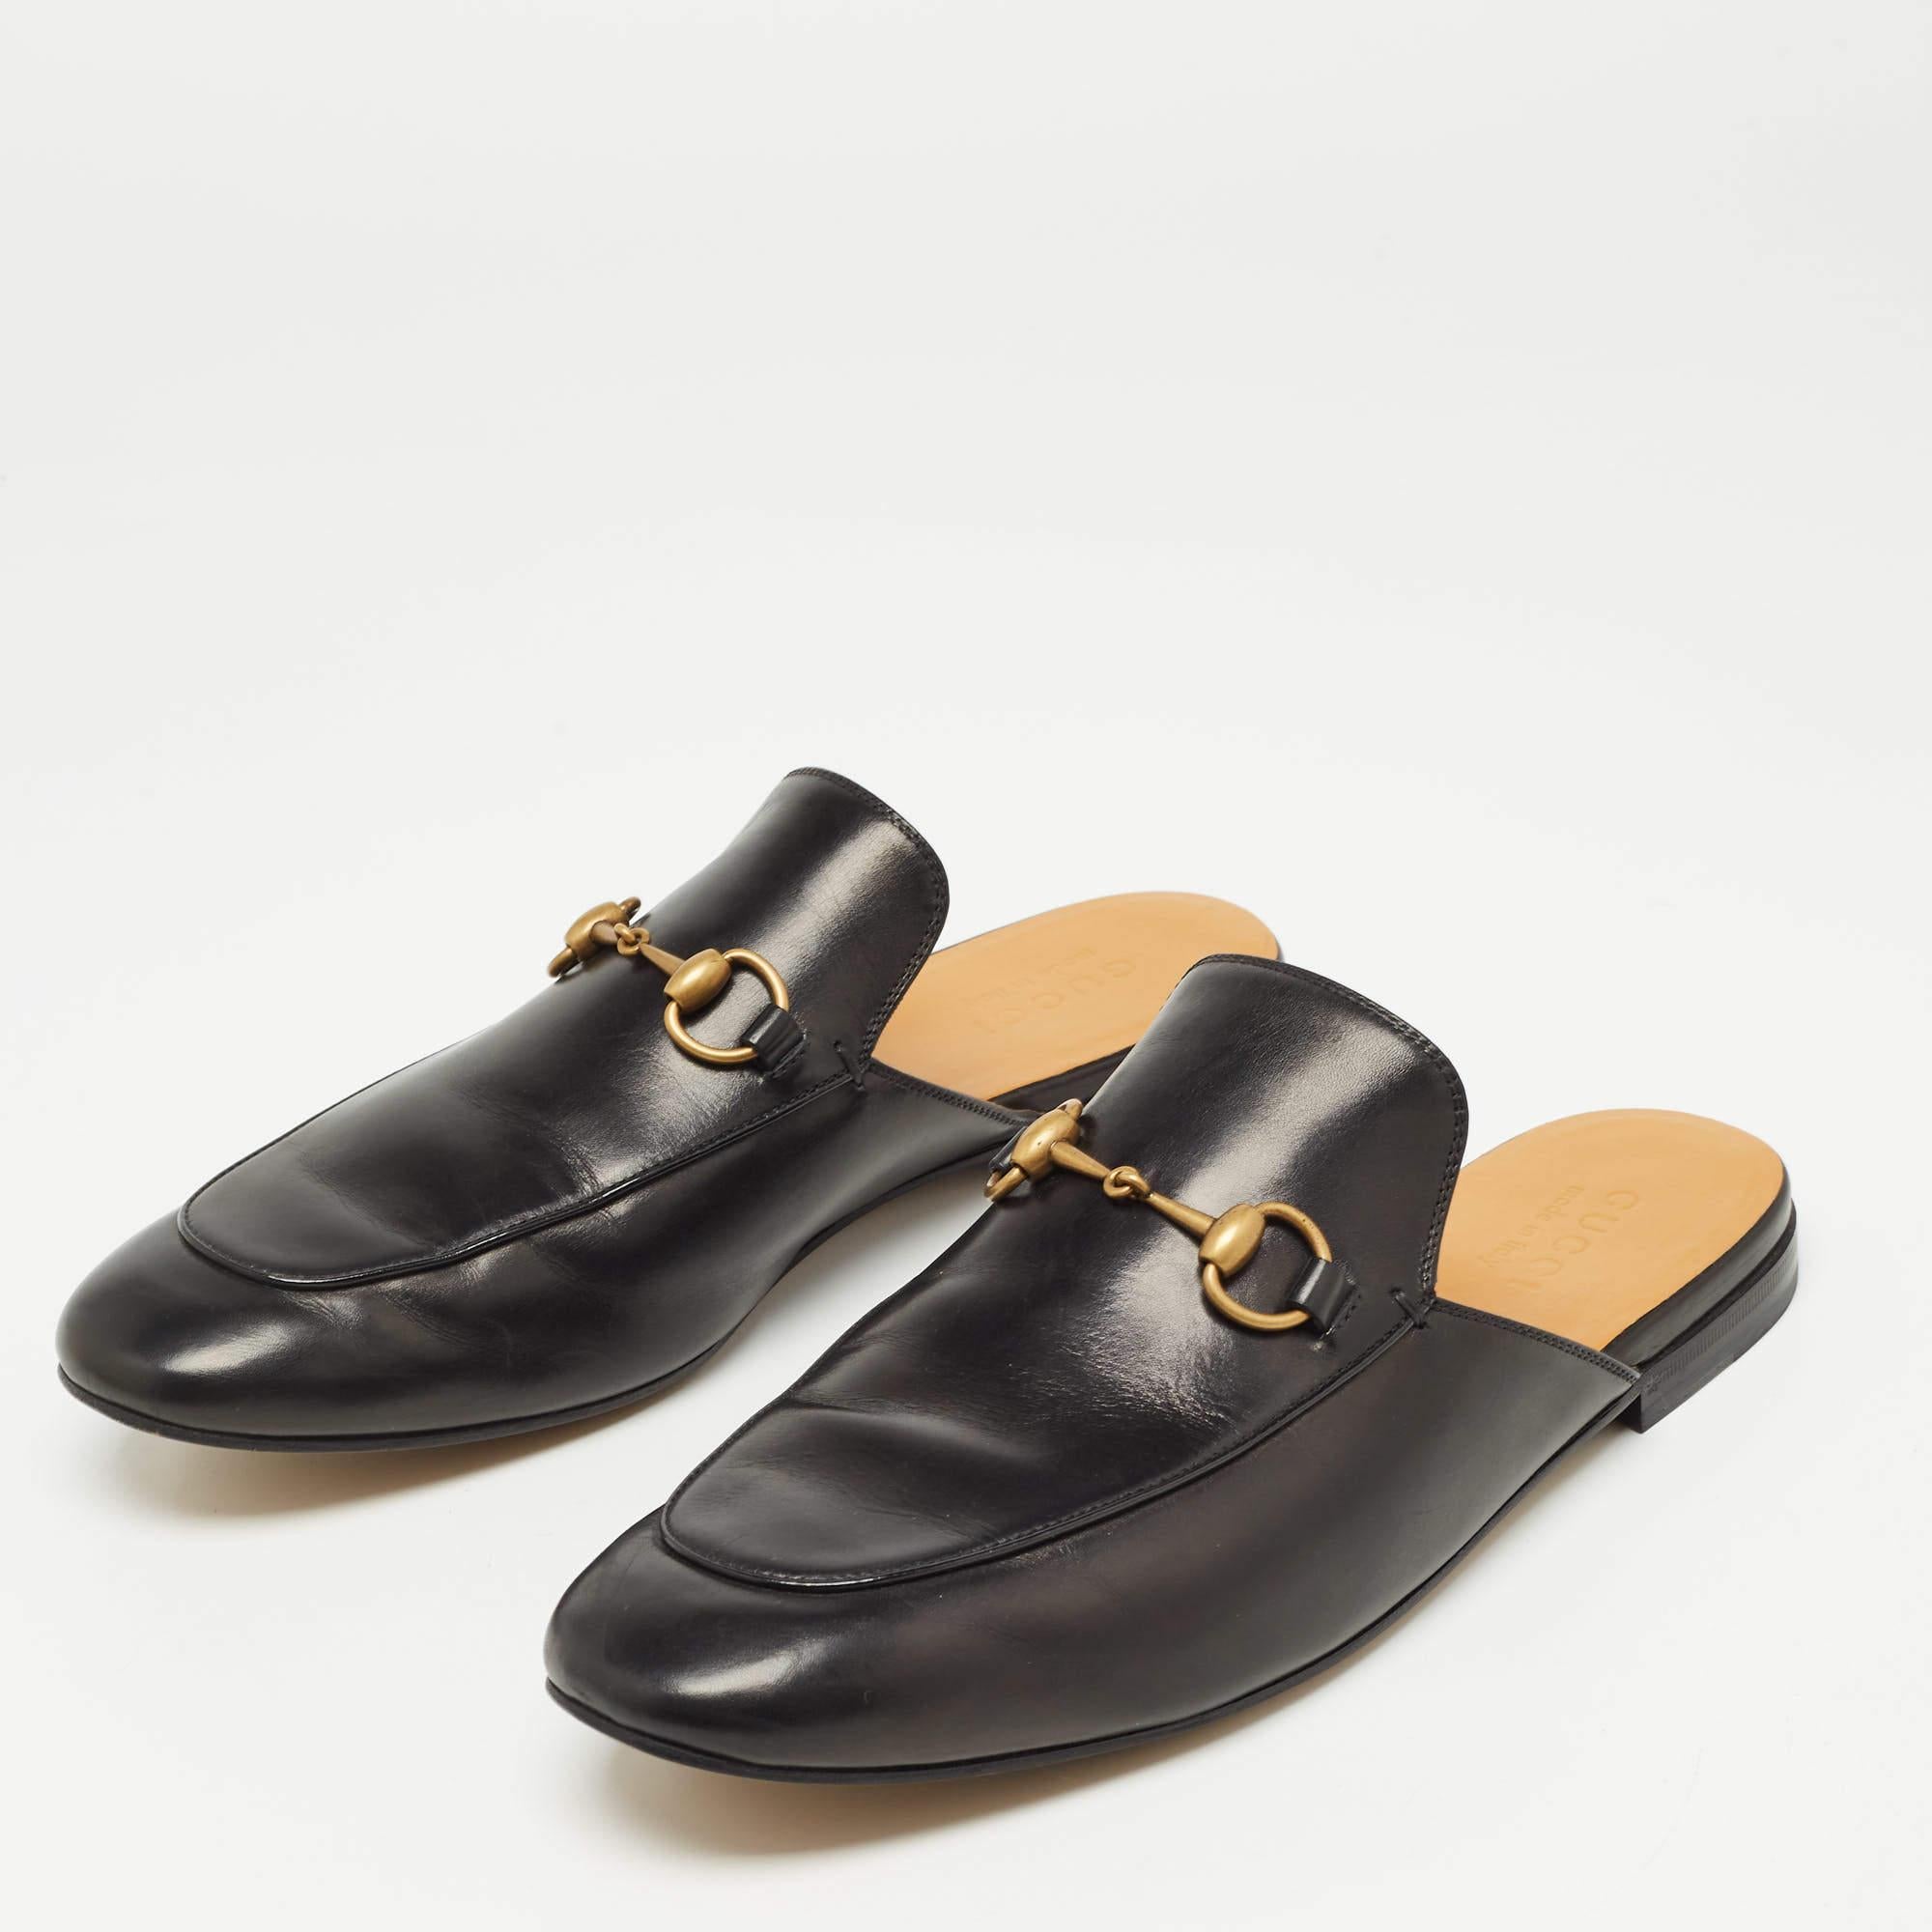 These Gucci Princetown mules signify luxury and practicality. An ultimate favorite of style enthusiasts, its silhouette has the luxe touch of the Horsebit motif on the uppers. It comes made from leather.

